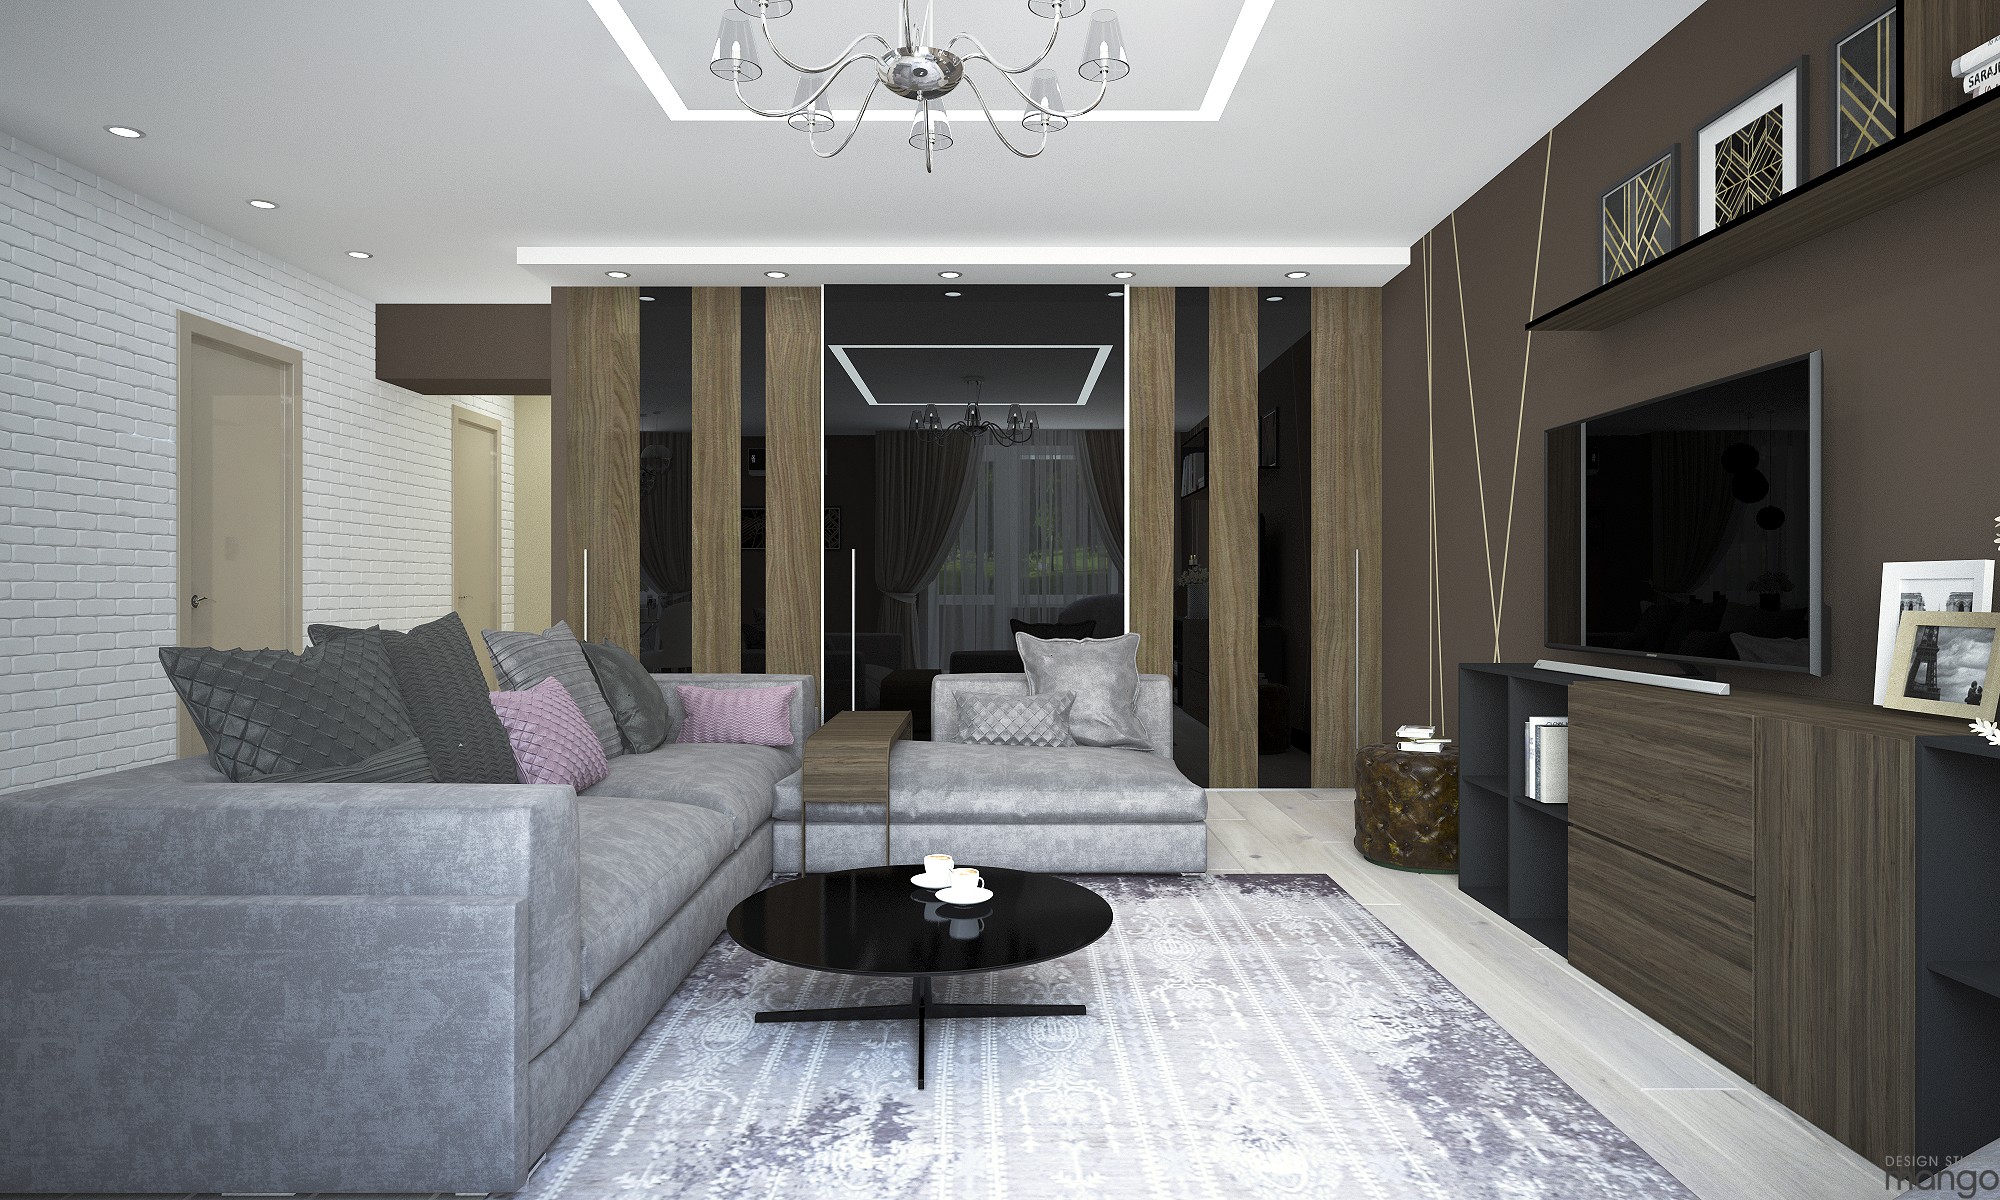 Luxury wooden living room "width =" 2000 "height =" 1200 "srcset =" https://mileray.com/wp-content/uploads/2020/05/1588516456_608_Inspiration-To-Arrange-Small-Living-Room-Designs-Which-Combine-Looks.jpg 2000w, https: // myfashionos .com / wp-content / uploads / 2016/09 / Design-Studio-Mango7-300x180.jpg 300w, https://mileray.com/wp-content/uploads/2016/09/Design-Studio-Mango7-768x461 . jpg 768w, https://mileray.com/wp-content/uploads/2016/09/Design-Studio-Mango7-1024x614.jpg 1024w, https://mileray.com/wp-content/uploads/2016/09/ Design-Studio-Mango7-696x418.jpg 696w, https://mileray.com/wp-content/uploads/2016/09/Design-Studio-Mango7-1068x641.jpg 1068w, https://mileray.com/wp- Content / Uploads / 2016/09 / Design-Studio-Mango7-700x420.jpg 700w "Sizes =" (maximum width: 2000px) 100vw, 2000px